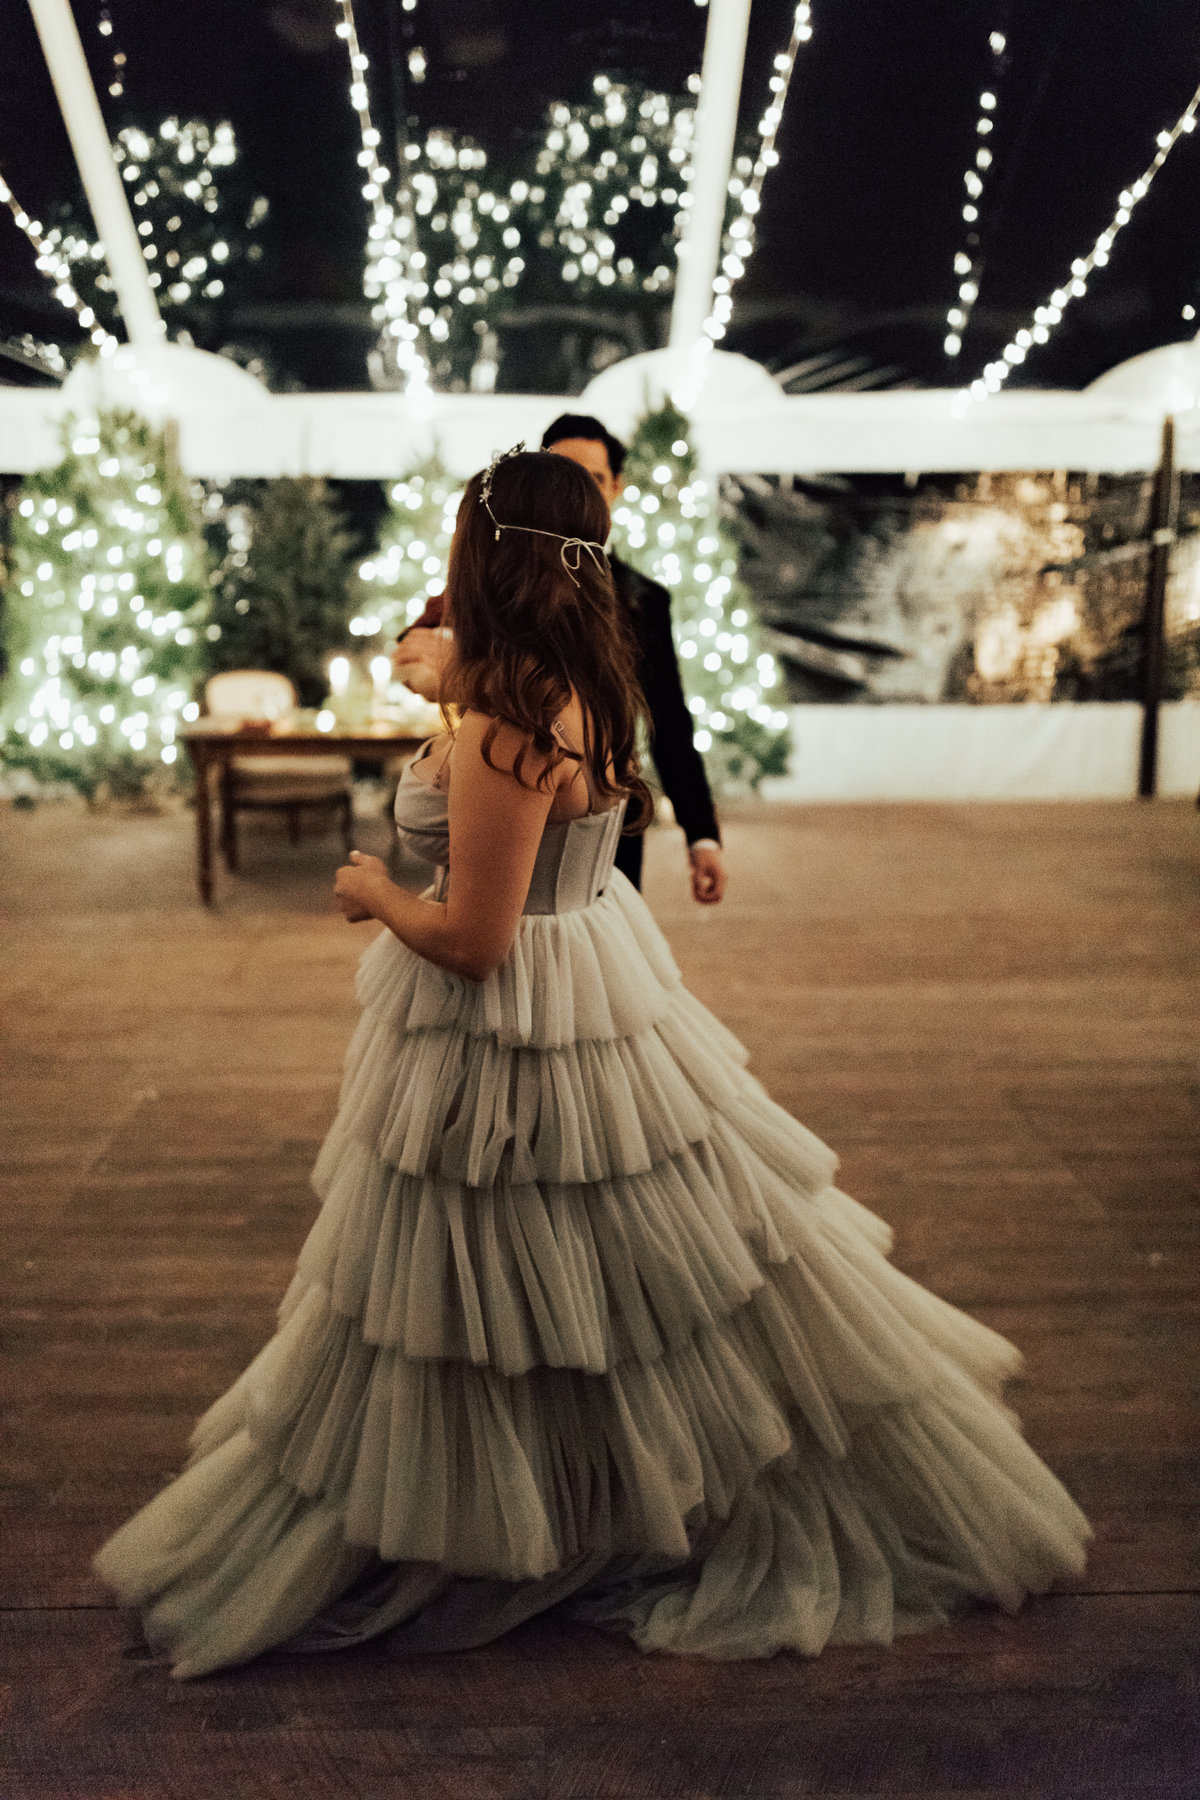 Christy-l-Johnston-Photography-Monica-Relyea-Events-Noelle-Downing-Instagram-Noelle_s-Favorite-Day-Wedding-Battenfelds-Christmas-tree-farm-Red-Hook-New-York-Hudson-Valley-upstate-november-2019-AP1A0188